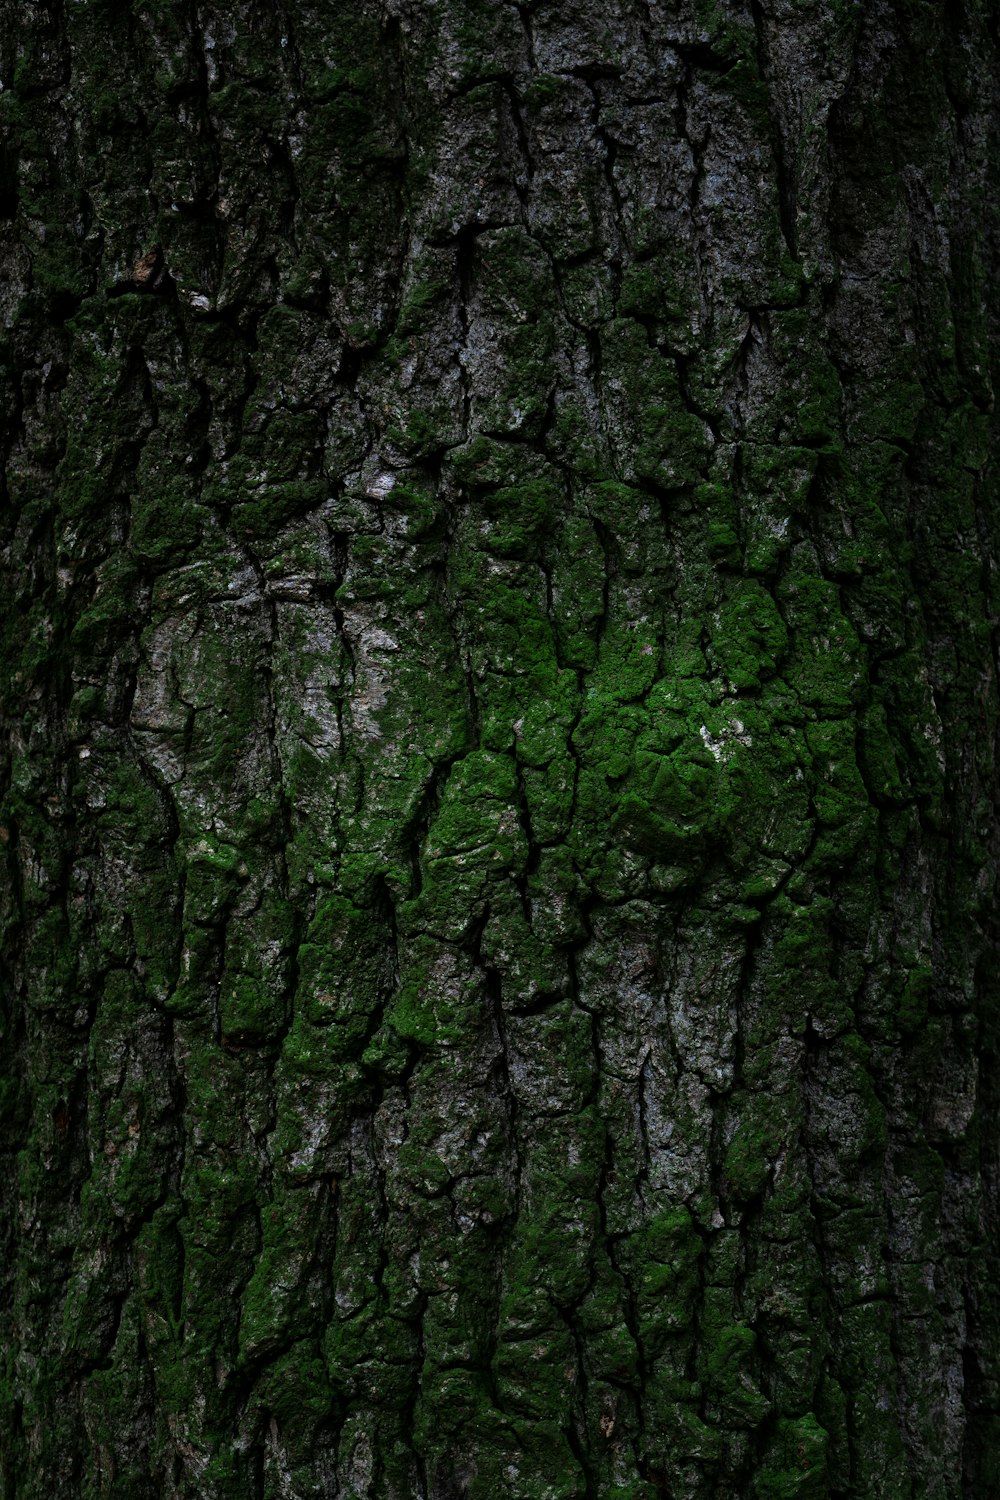 A close up of a tree with green moss growing on it photo – Free Green Image  on Unsplash